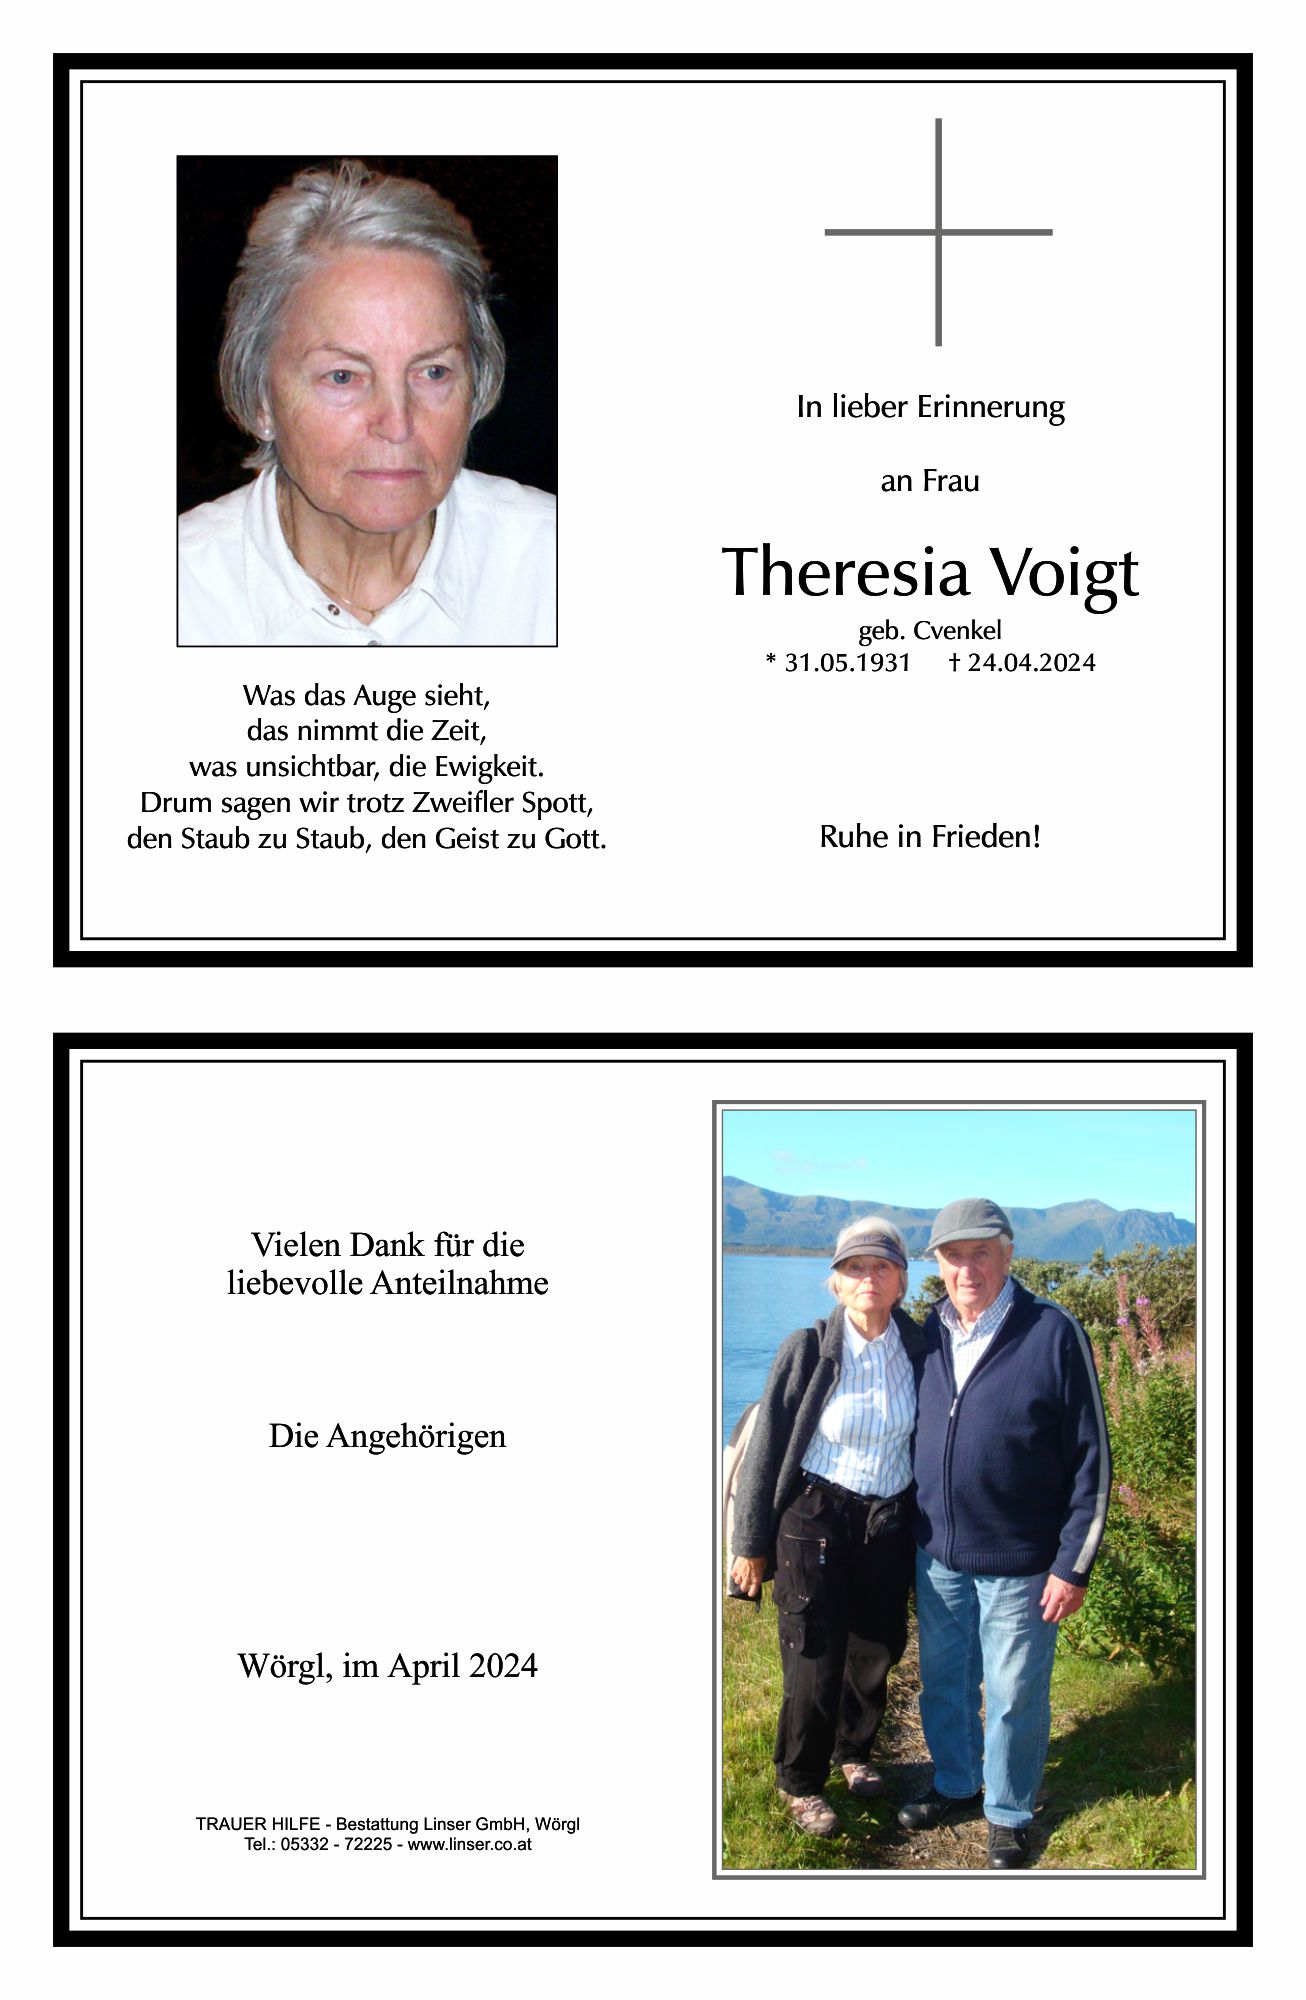 Theresia Voigt